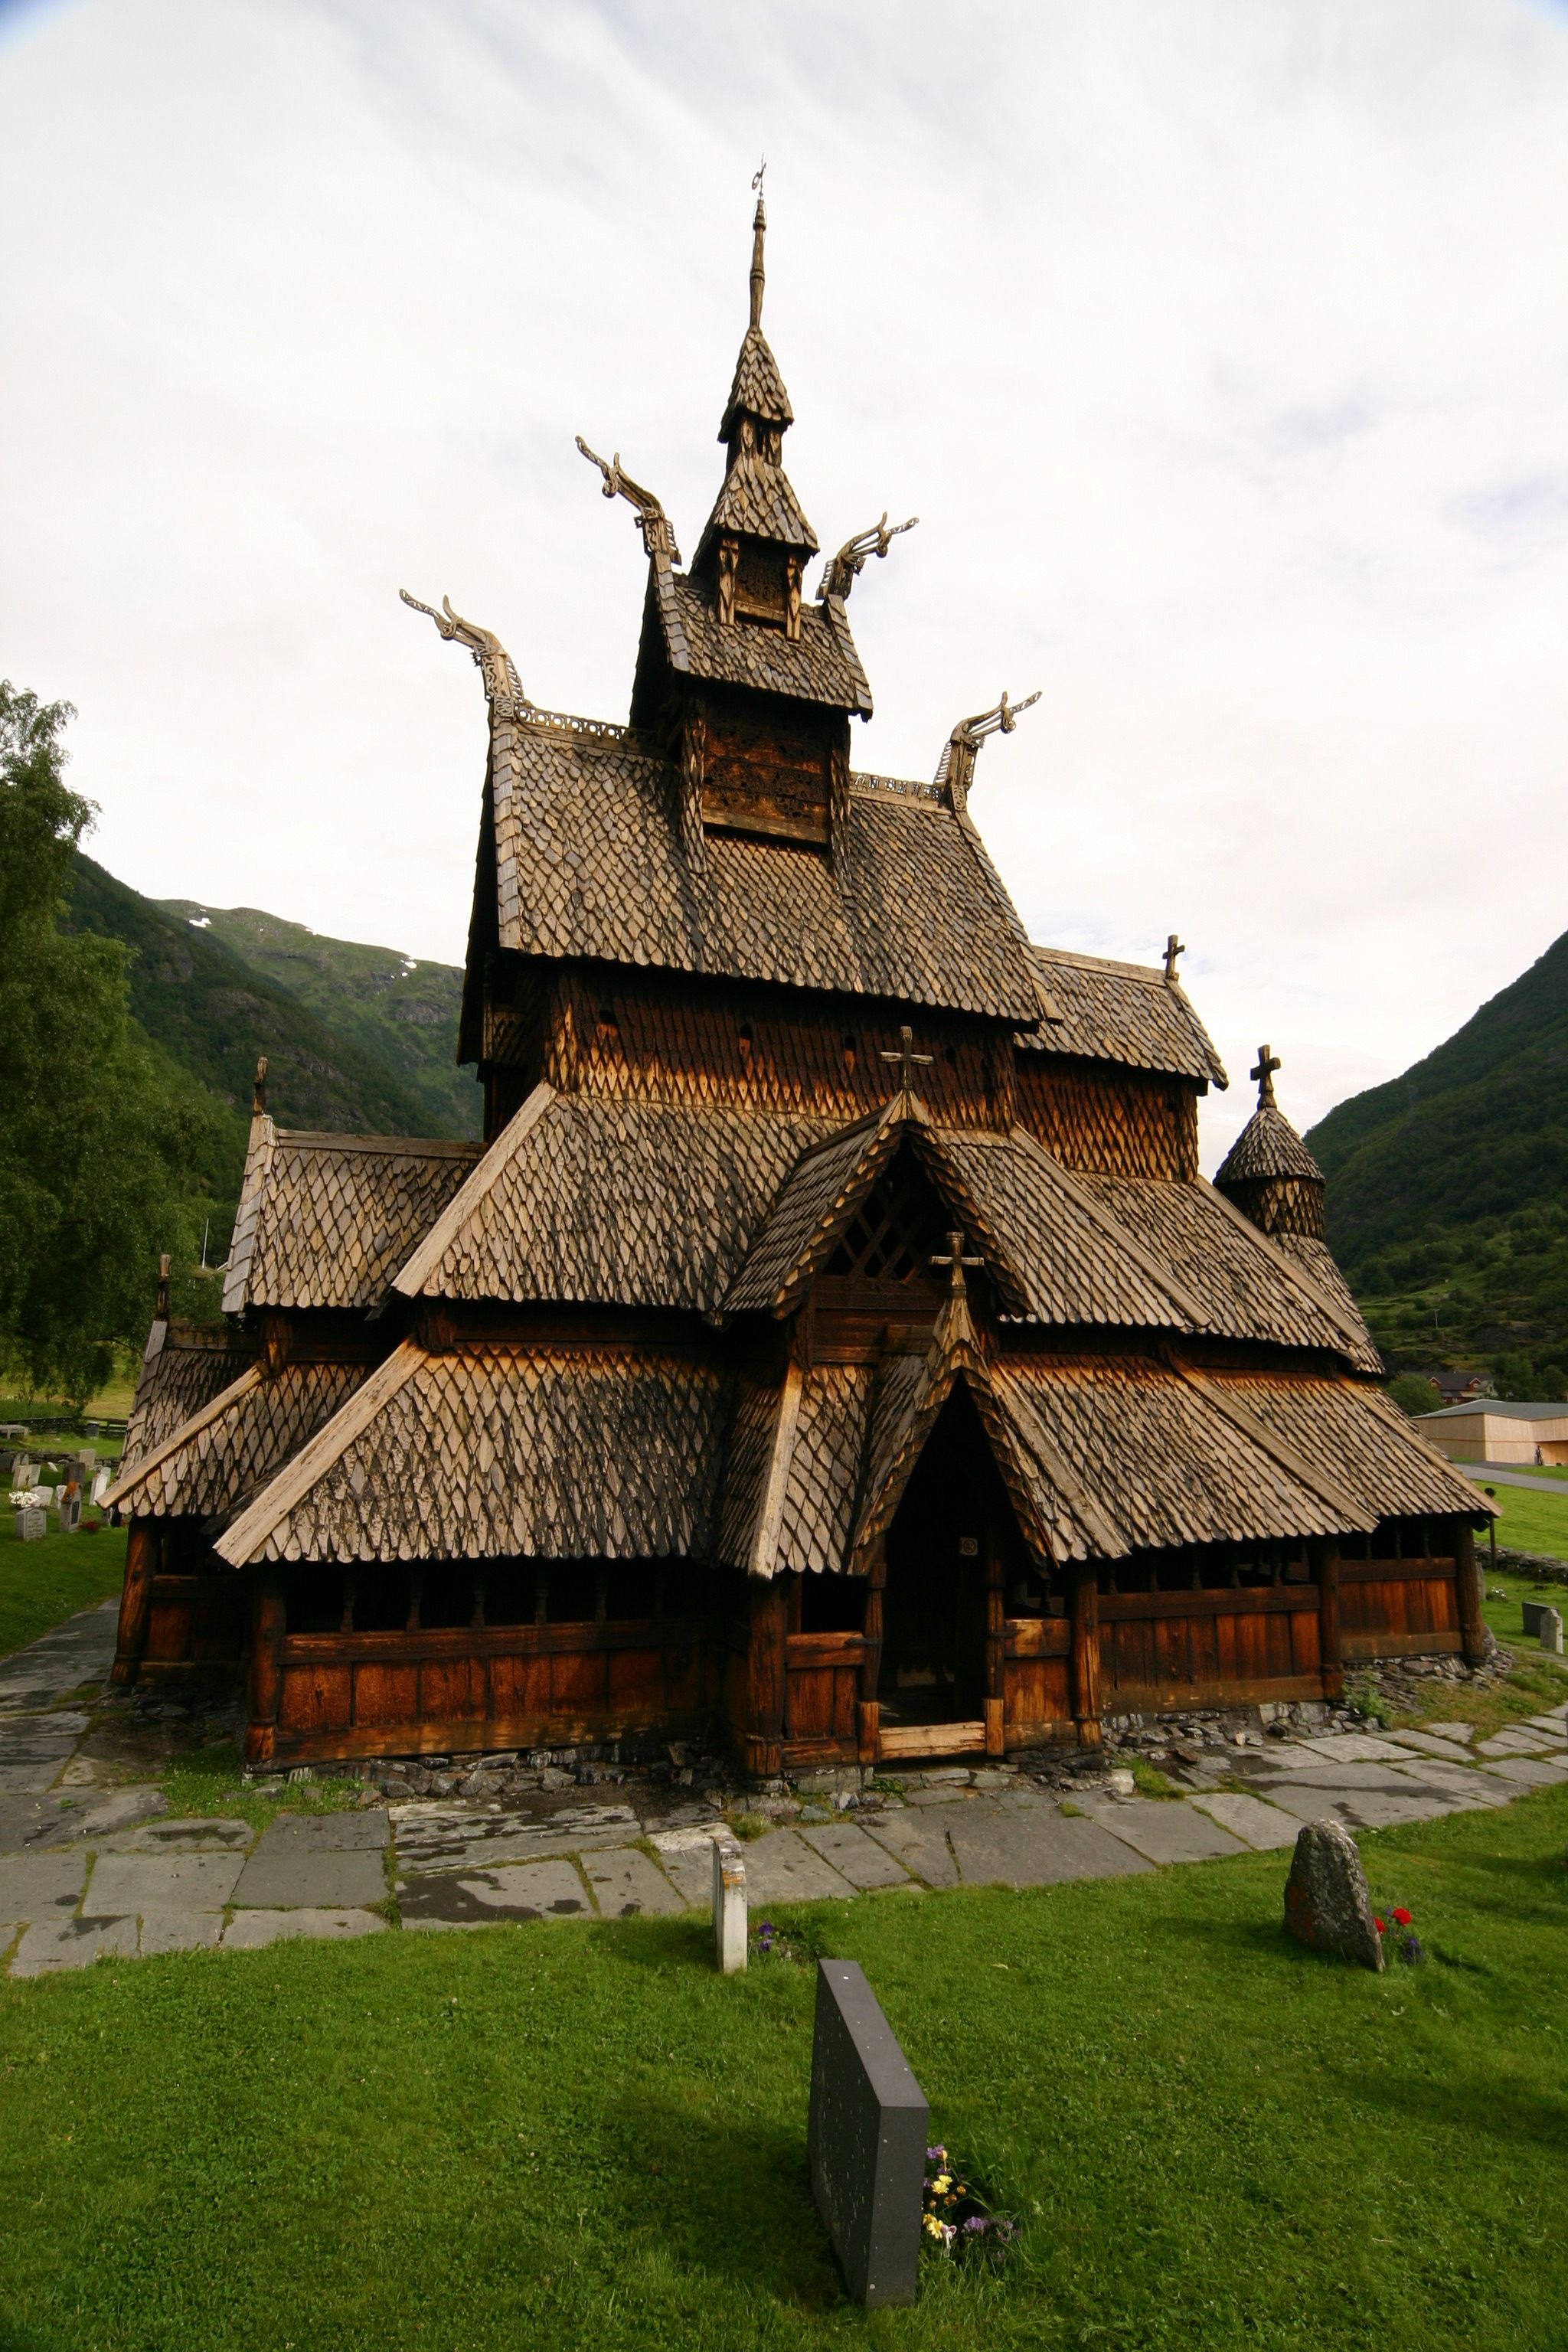 highly unusual ancient building in Scandinavia. 